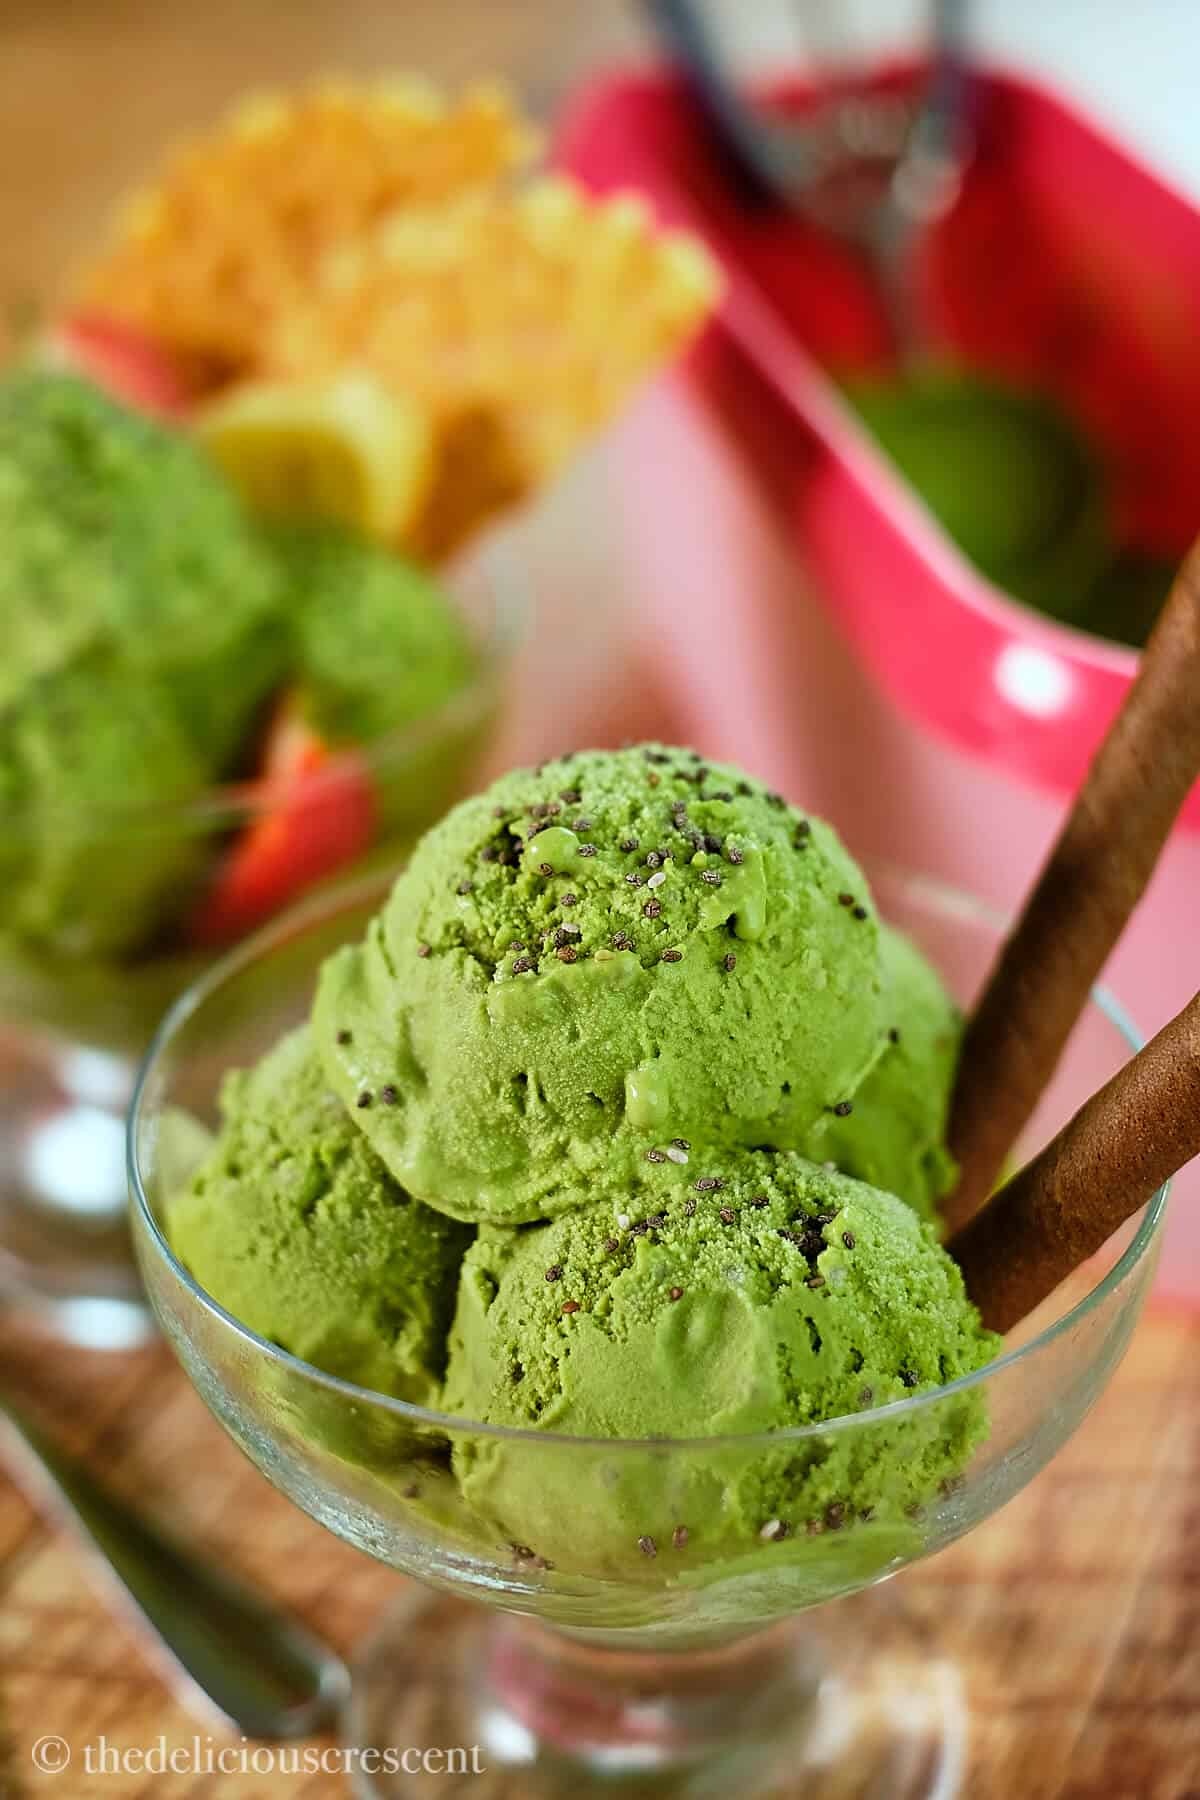 Ice cream made with green tea and served in a bowl.